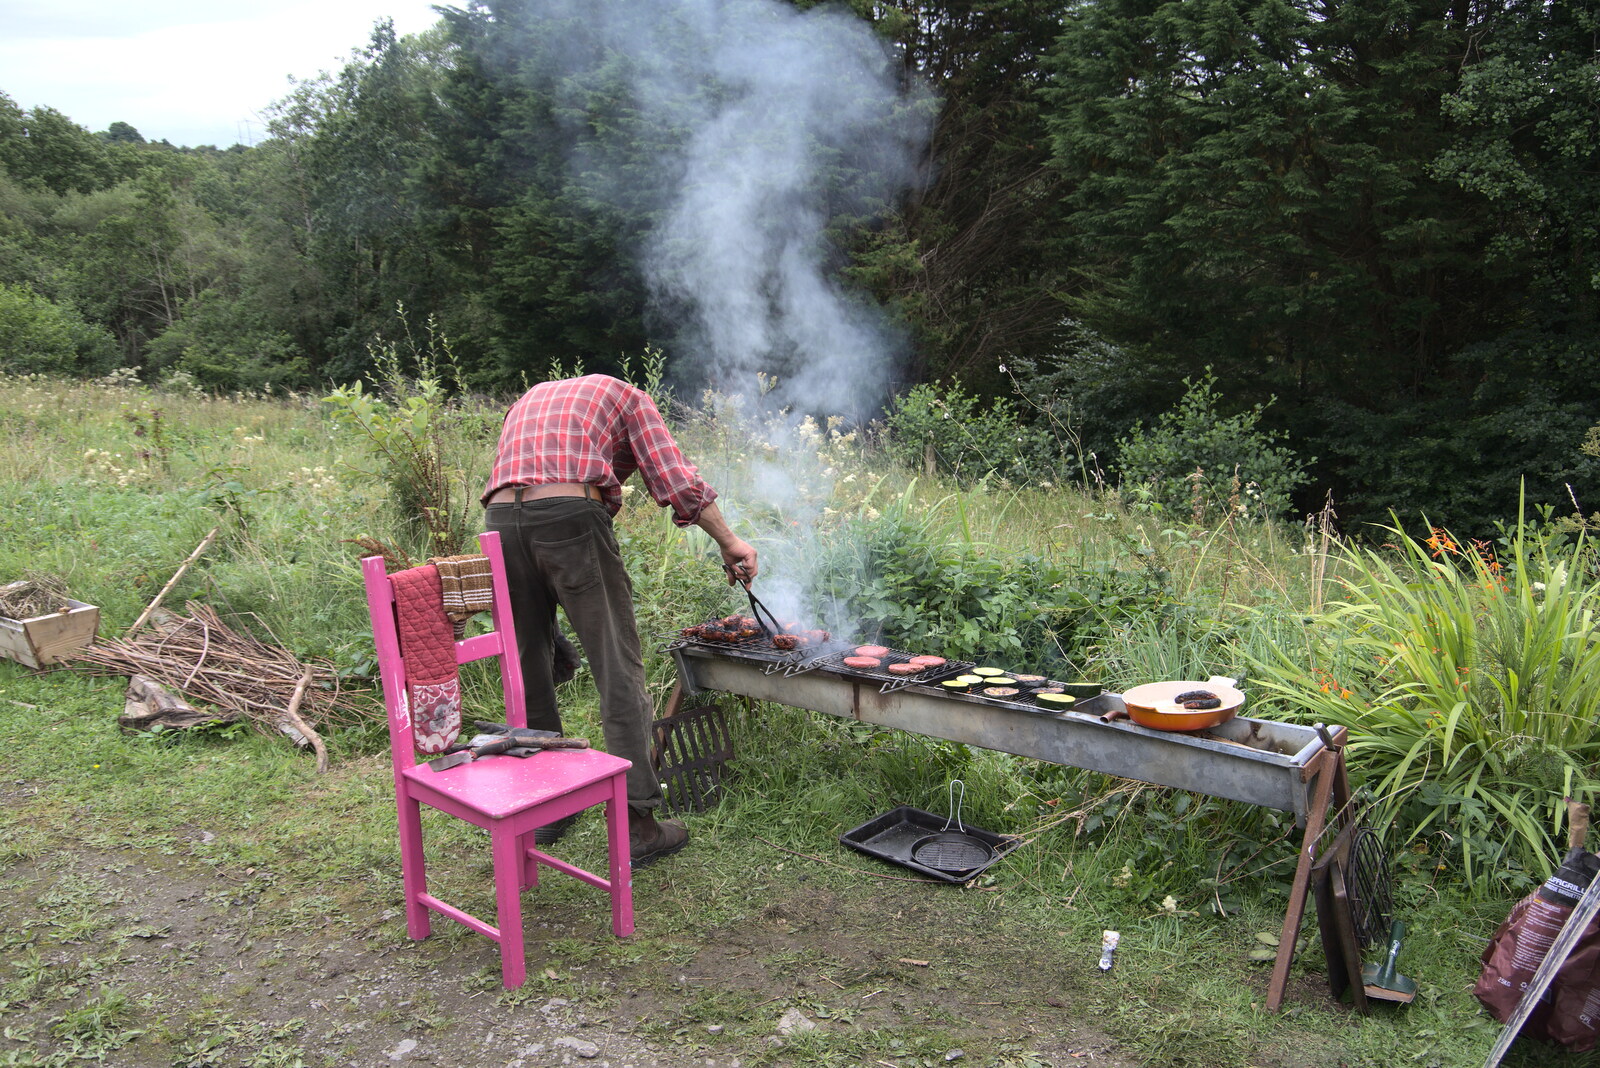 A Trip to Manorhamilton, County Leitrim, Ireland - 11th August 2021: Philly's burns up some burgers